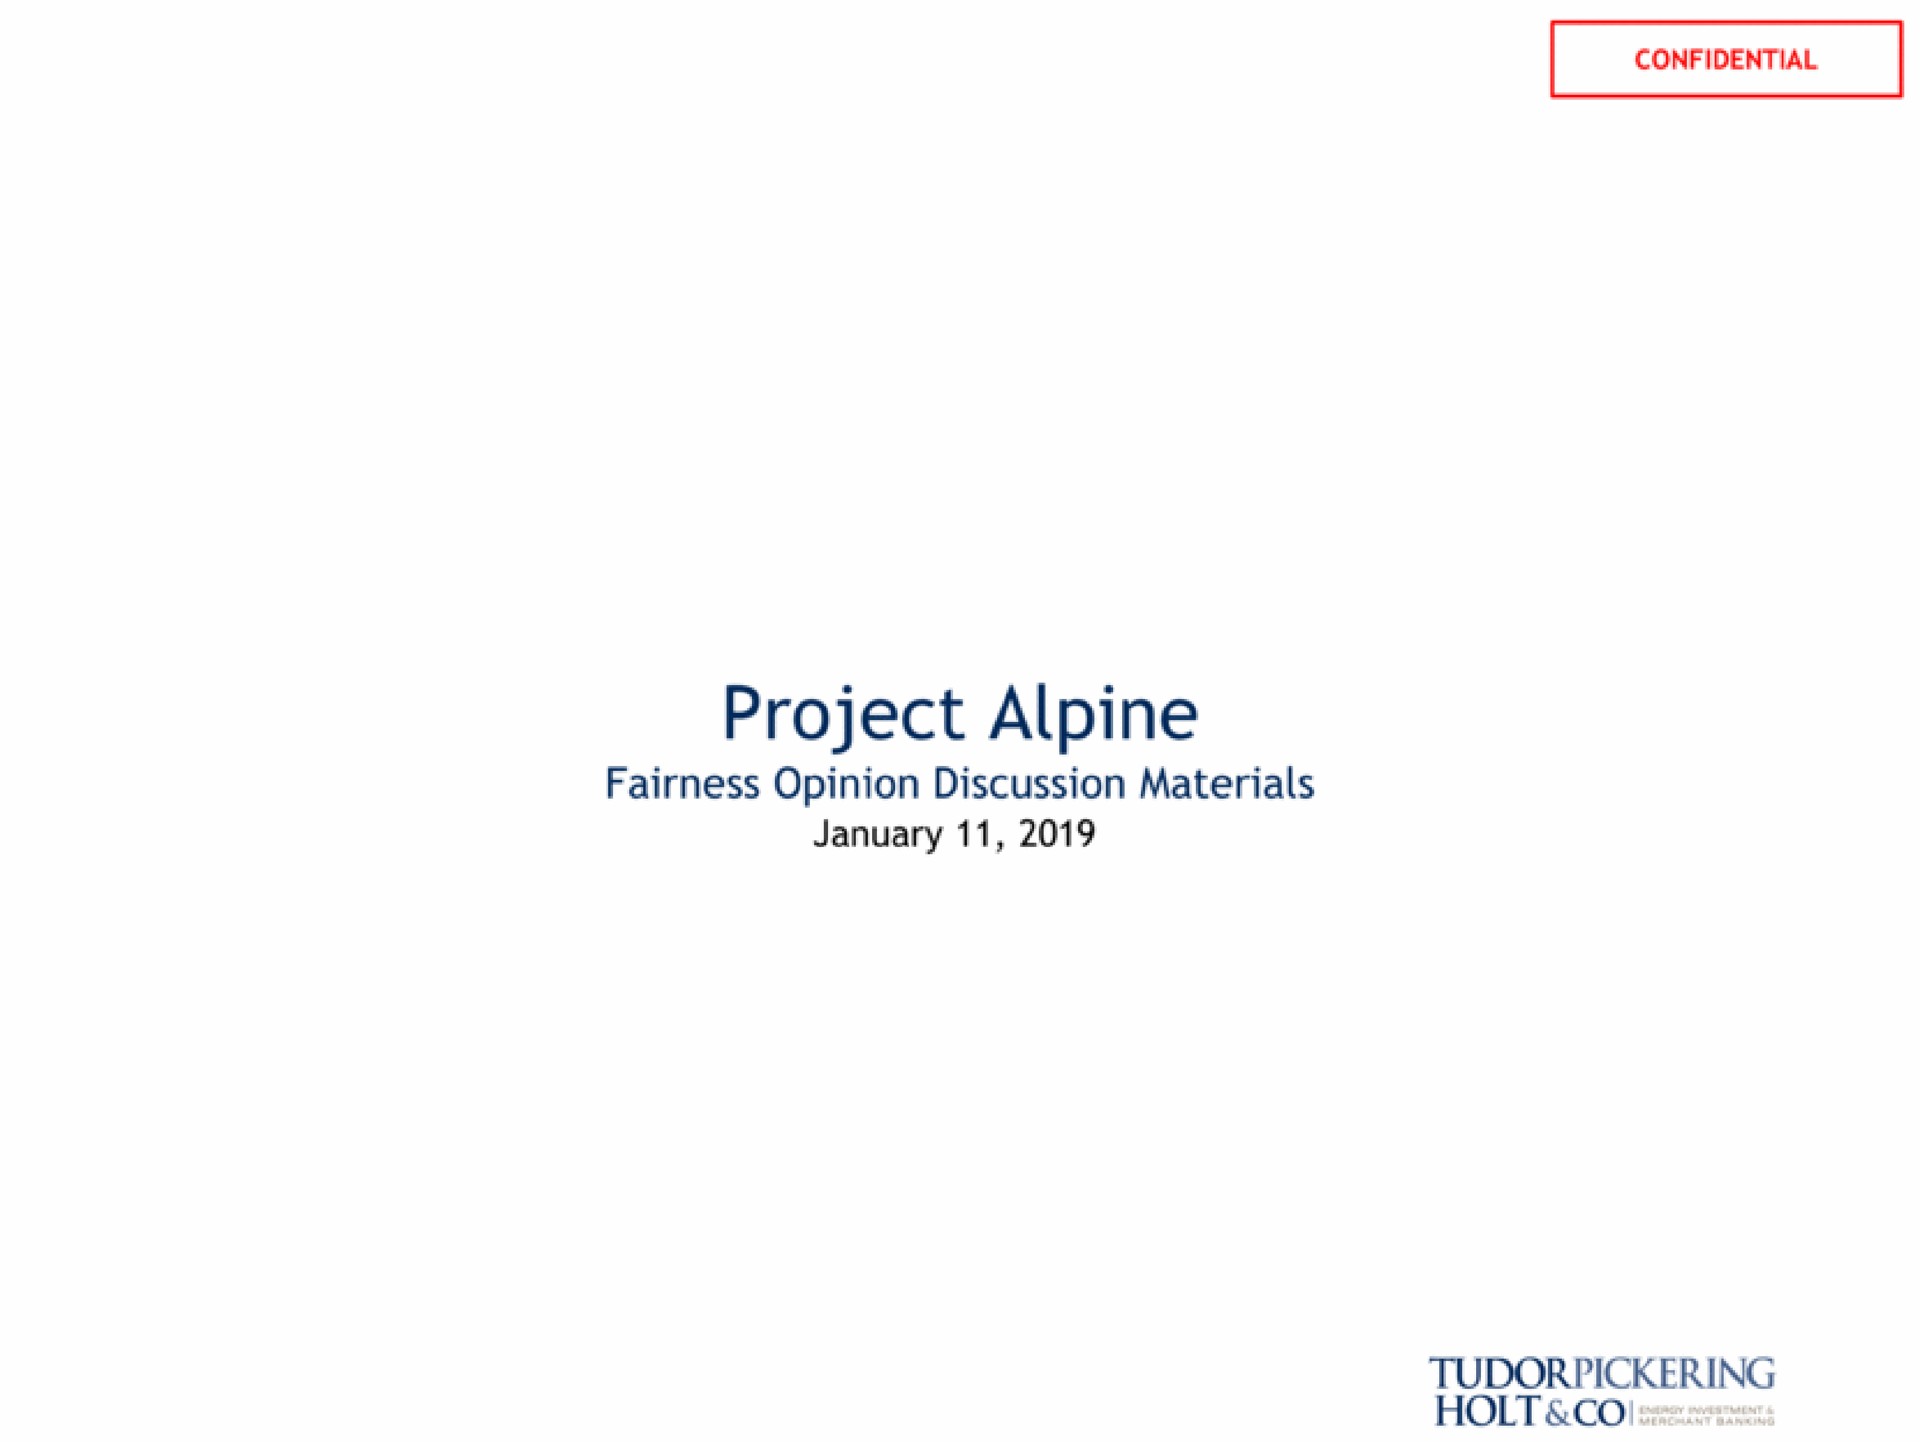 project alpine fairness opinion discussion materials holt | Tudor, Pickering, Holt & Co